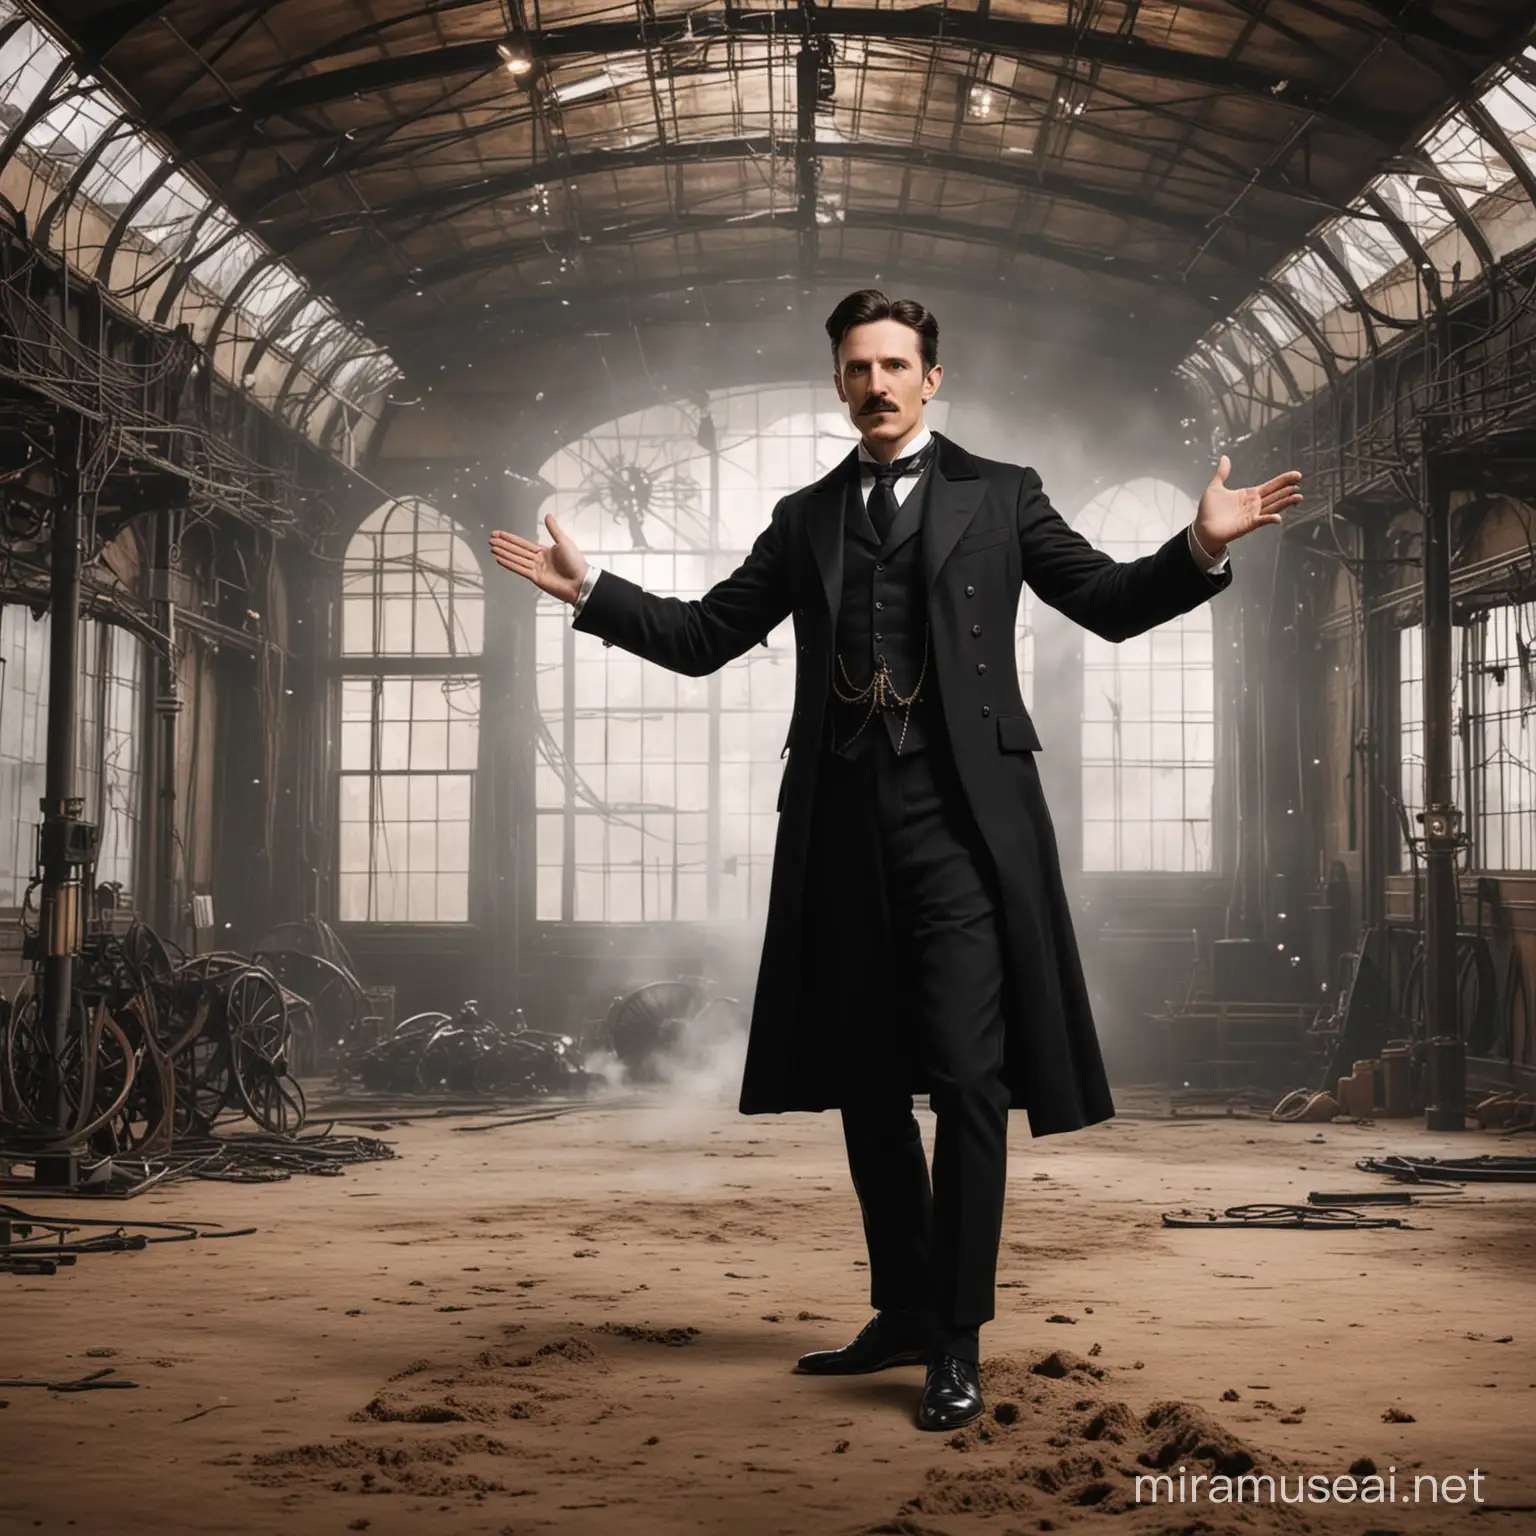 Nikola tesla stranding front of amazing indoor background 1800s and he is wearing his dapper steampunk black suit and has opened arms